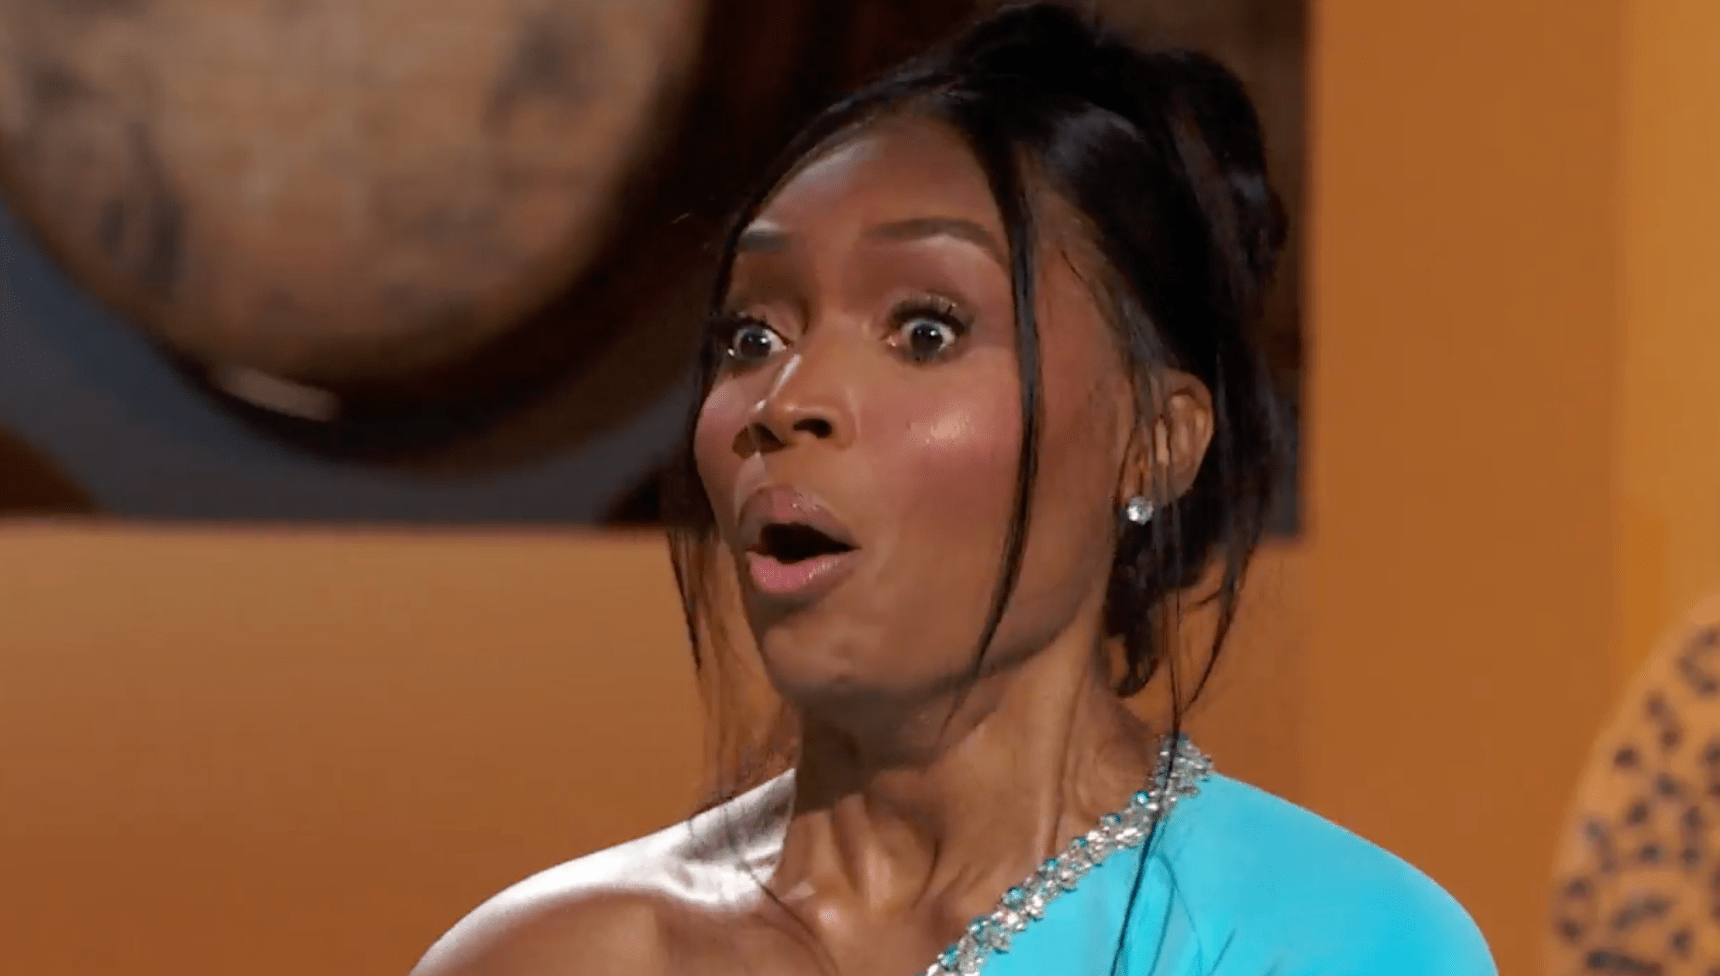 RHOA Reunion: BRAVO’S ‘THE REAL HOUSEWIVES OF ATLANTA’ TWO-PART REUNION